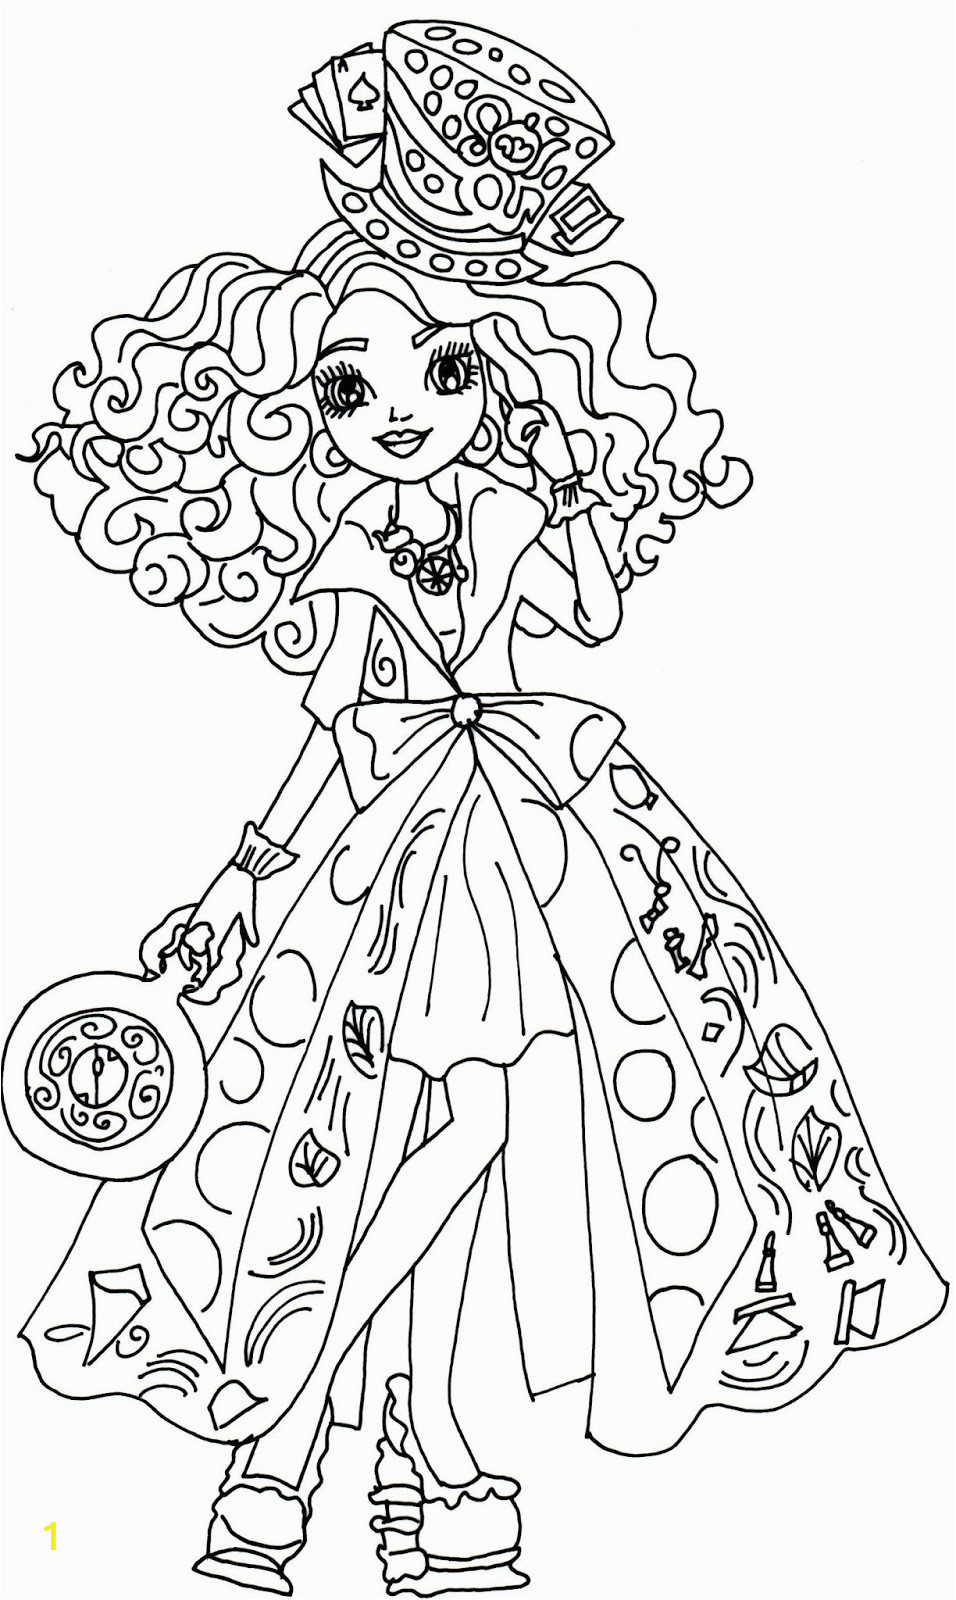 Ever after High Coloring Pages Madeline Hatter Desenho De Madeline Hatter De Ever after High Para Colorir